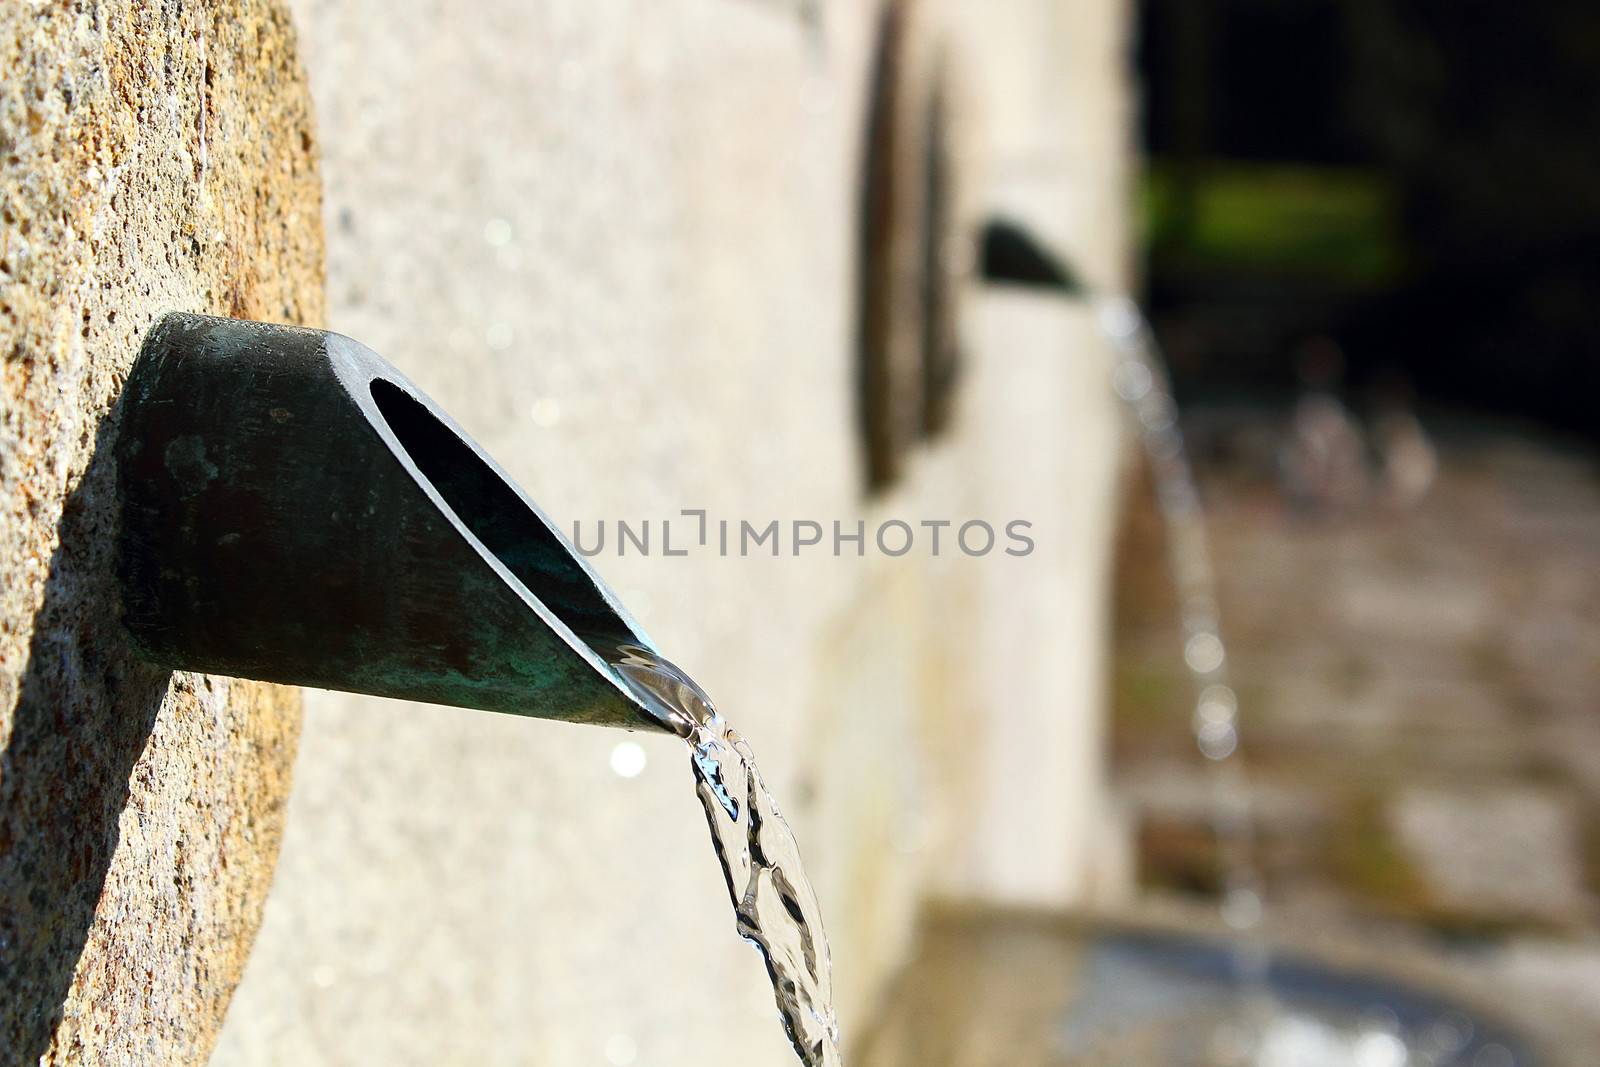 Fountain of water by dynamicfoto